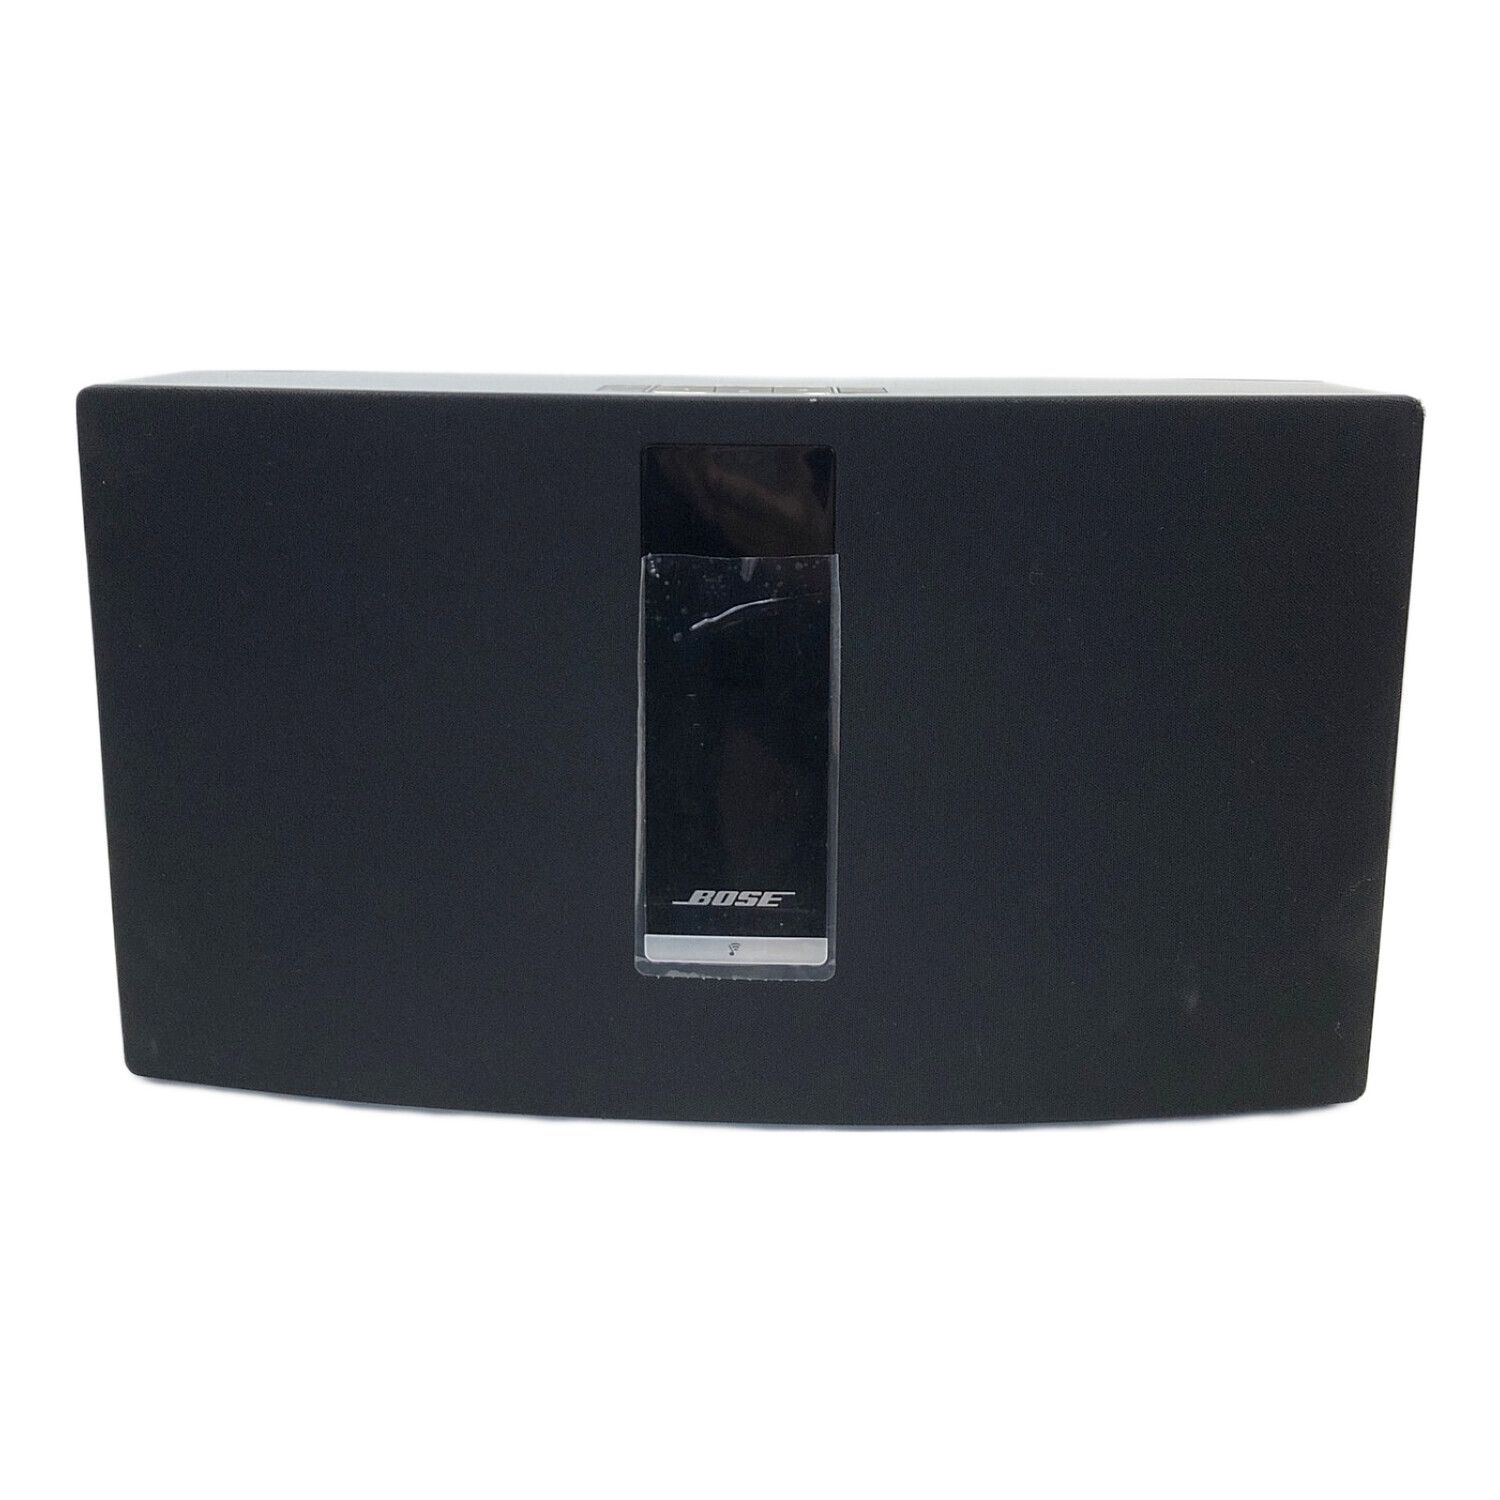 BOSE (ボーズ) スピーカー SoundTouch 30 Series wireless music 